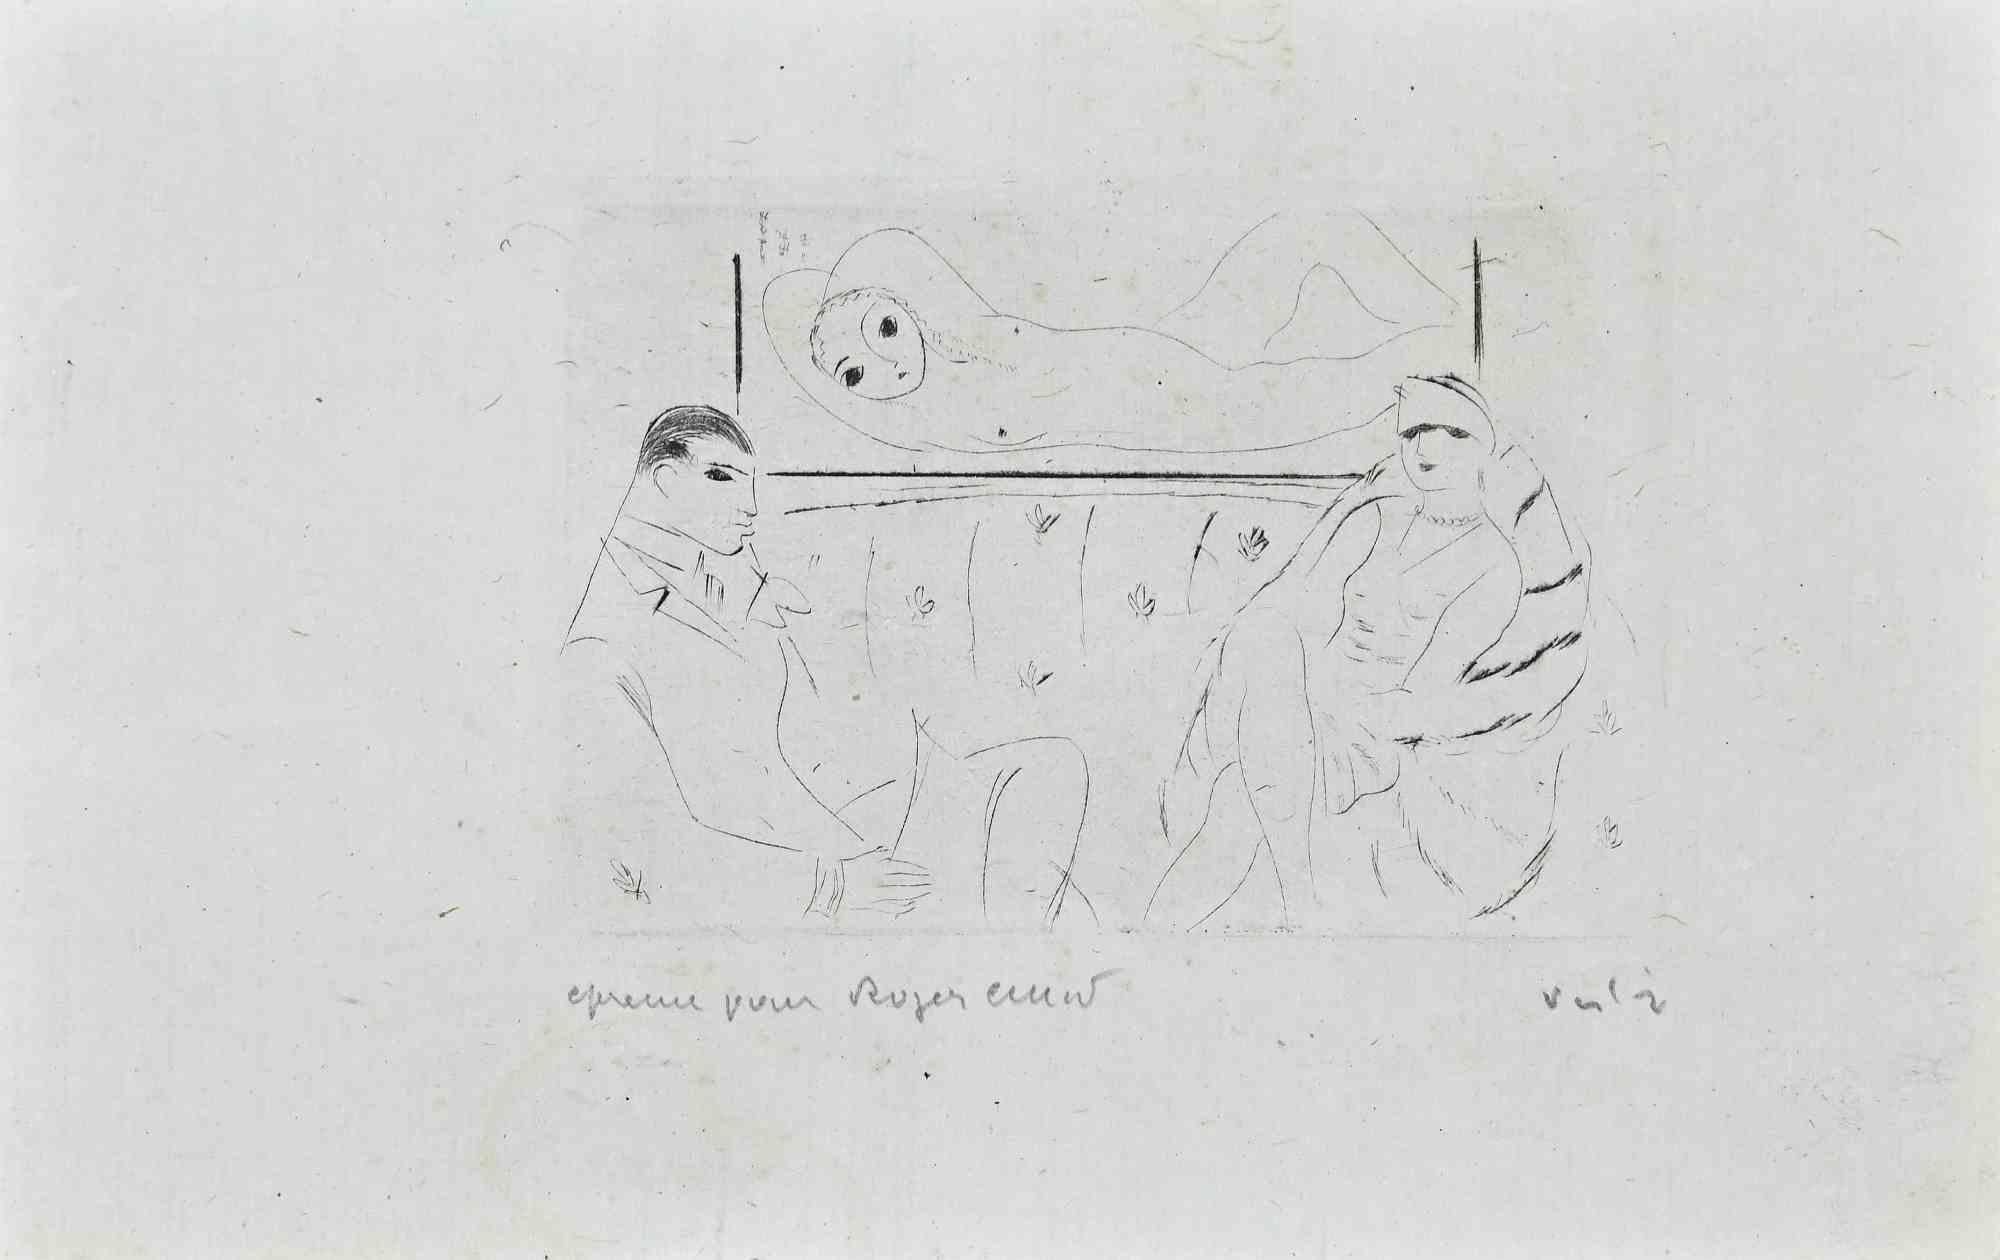 Marcel Vertès Figurative Print - Waiting Room - Original Etching and Drypoint by Marcel Vertés - 1920